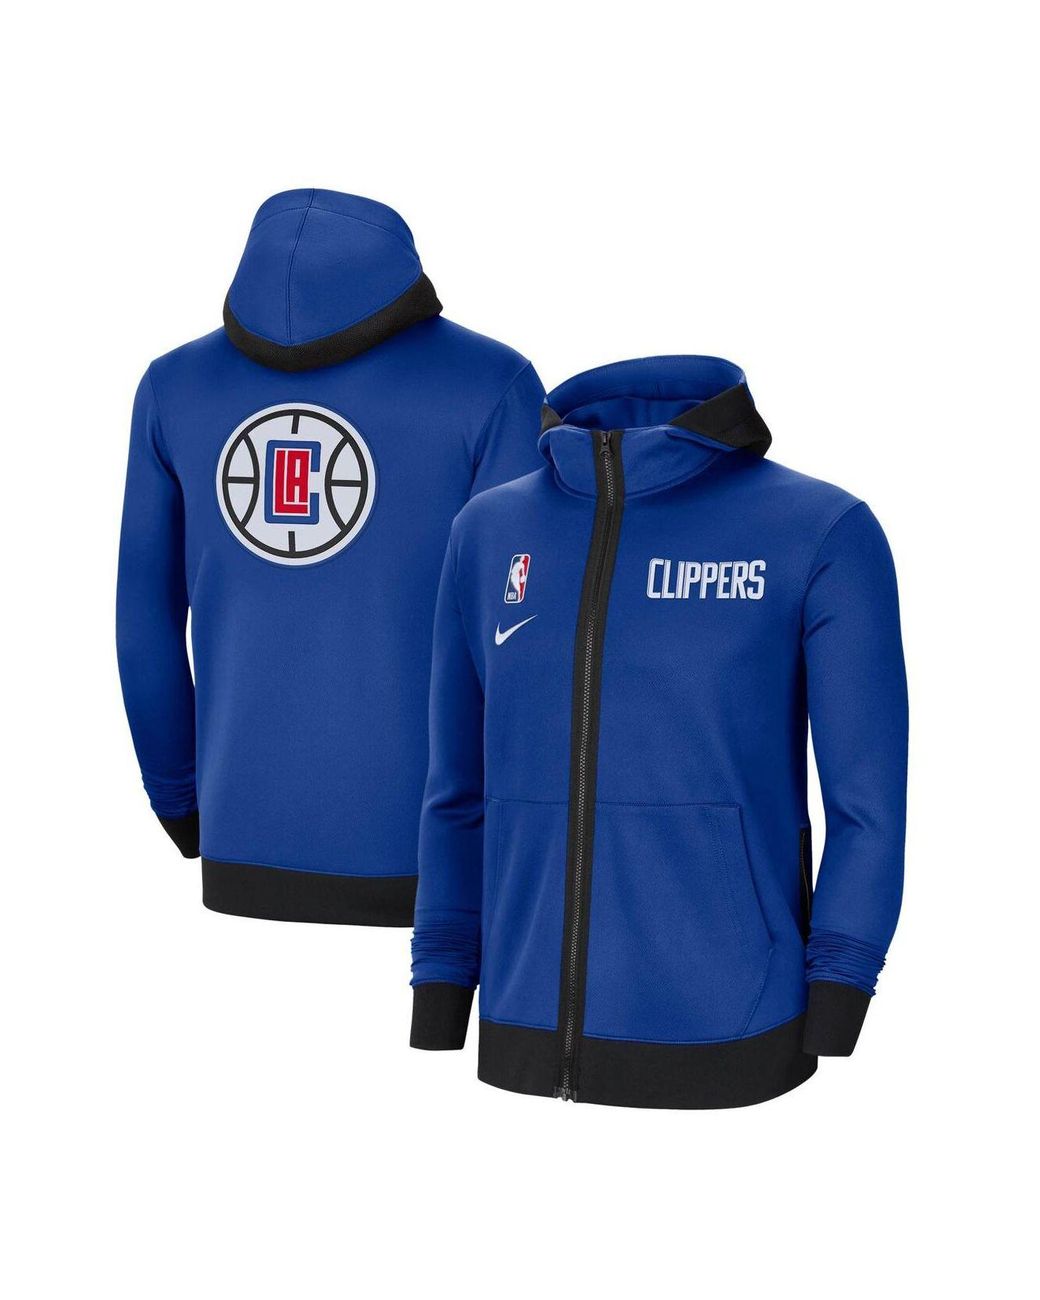 Nike Synthetic Royal La Clippers Authentic Showtime Performance Full ...